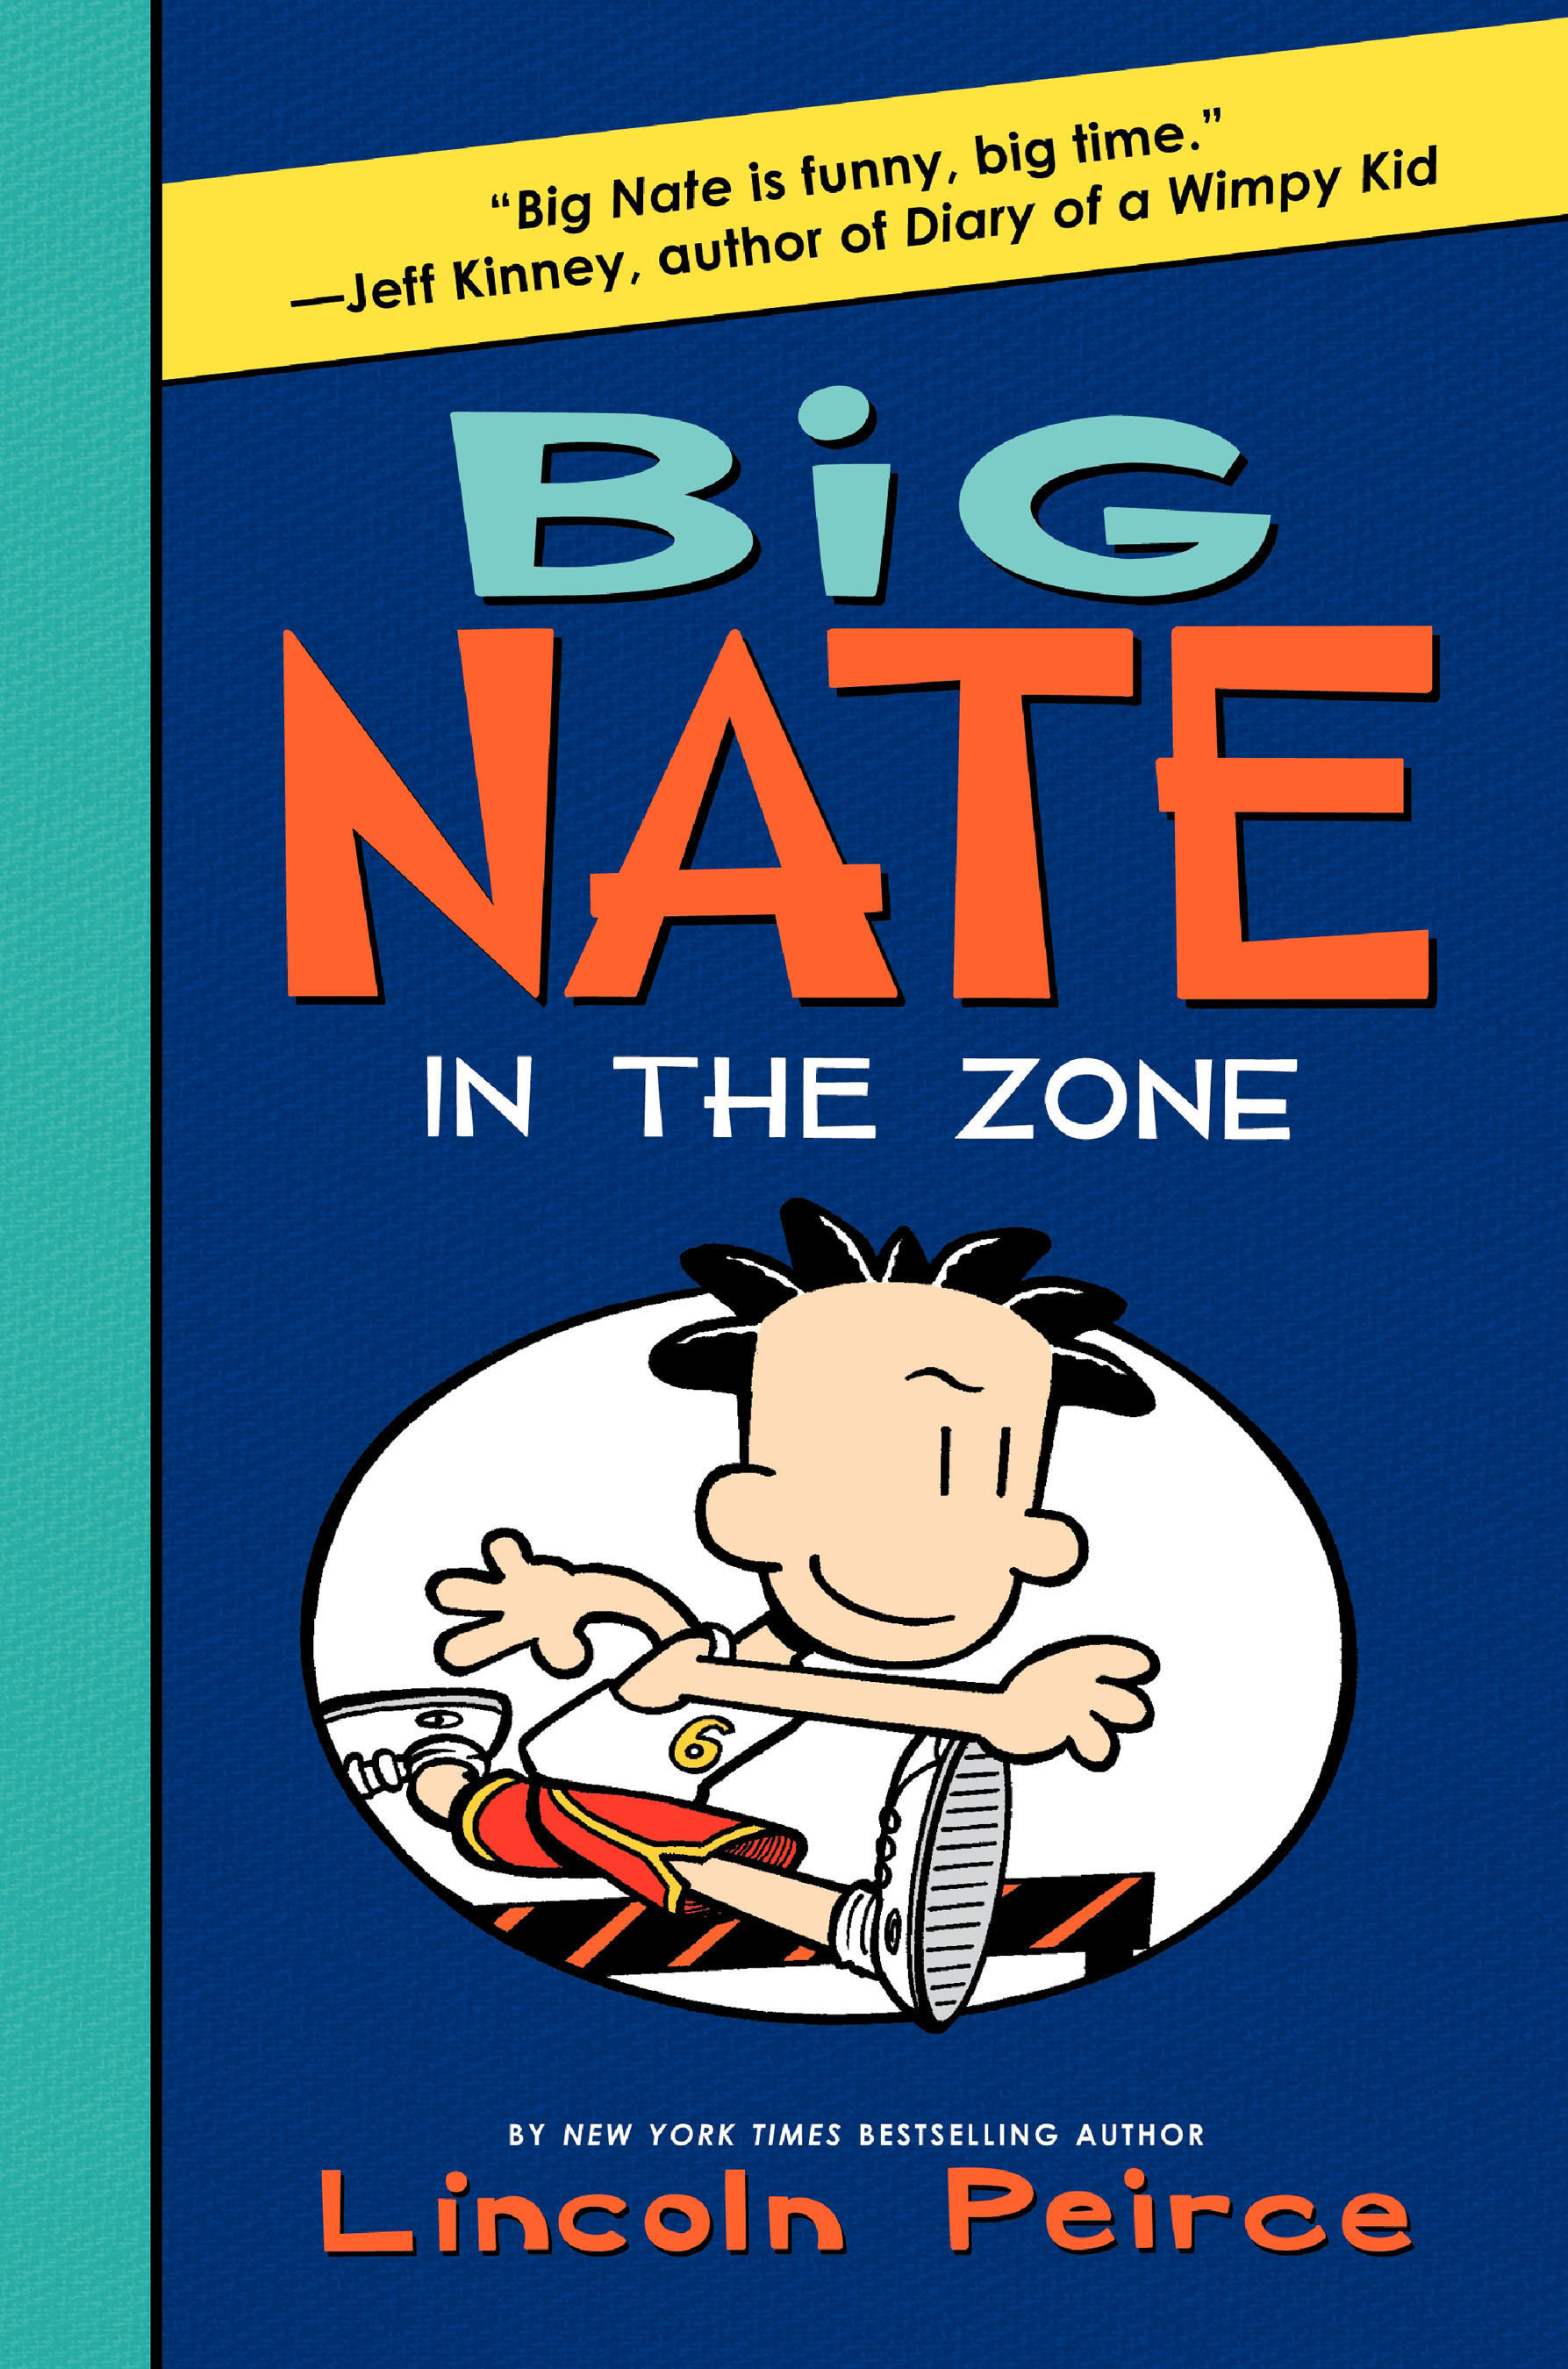 To Celebrate 6th Book In Big Nate Series, HarperCollins Breaks Guinness World Records(R) Title For World's Longest Cartoon Strip By A Team. (PRNewsFoto/Harper Collins Children's Books) (PRNewsFoto/HARPER COLLINS CHILDREN'S BOOKS)